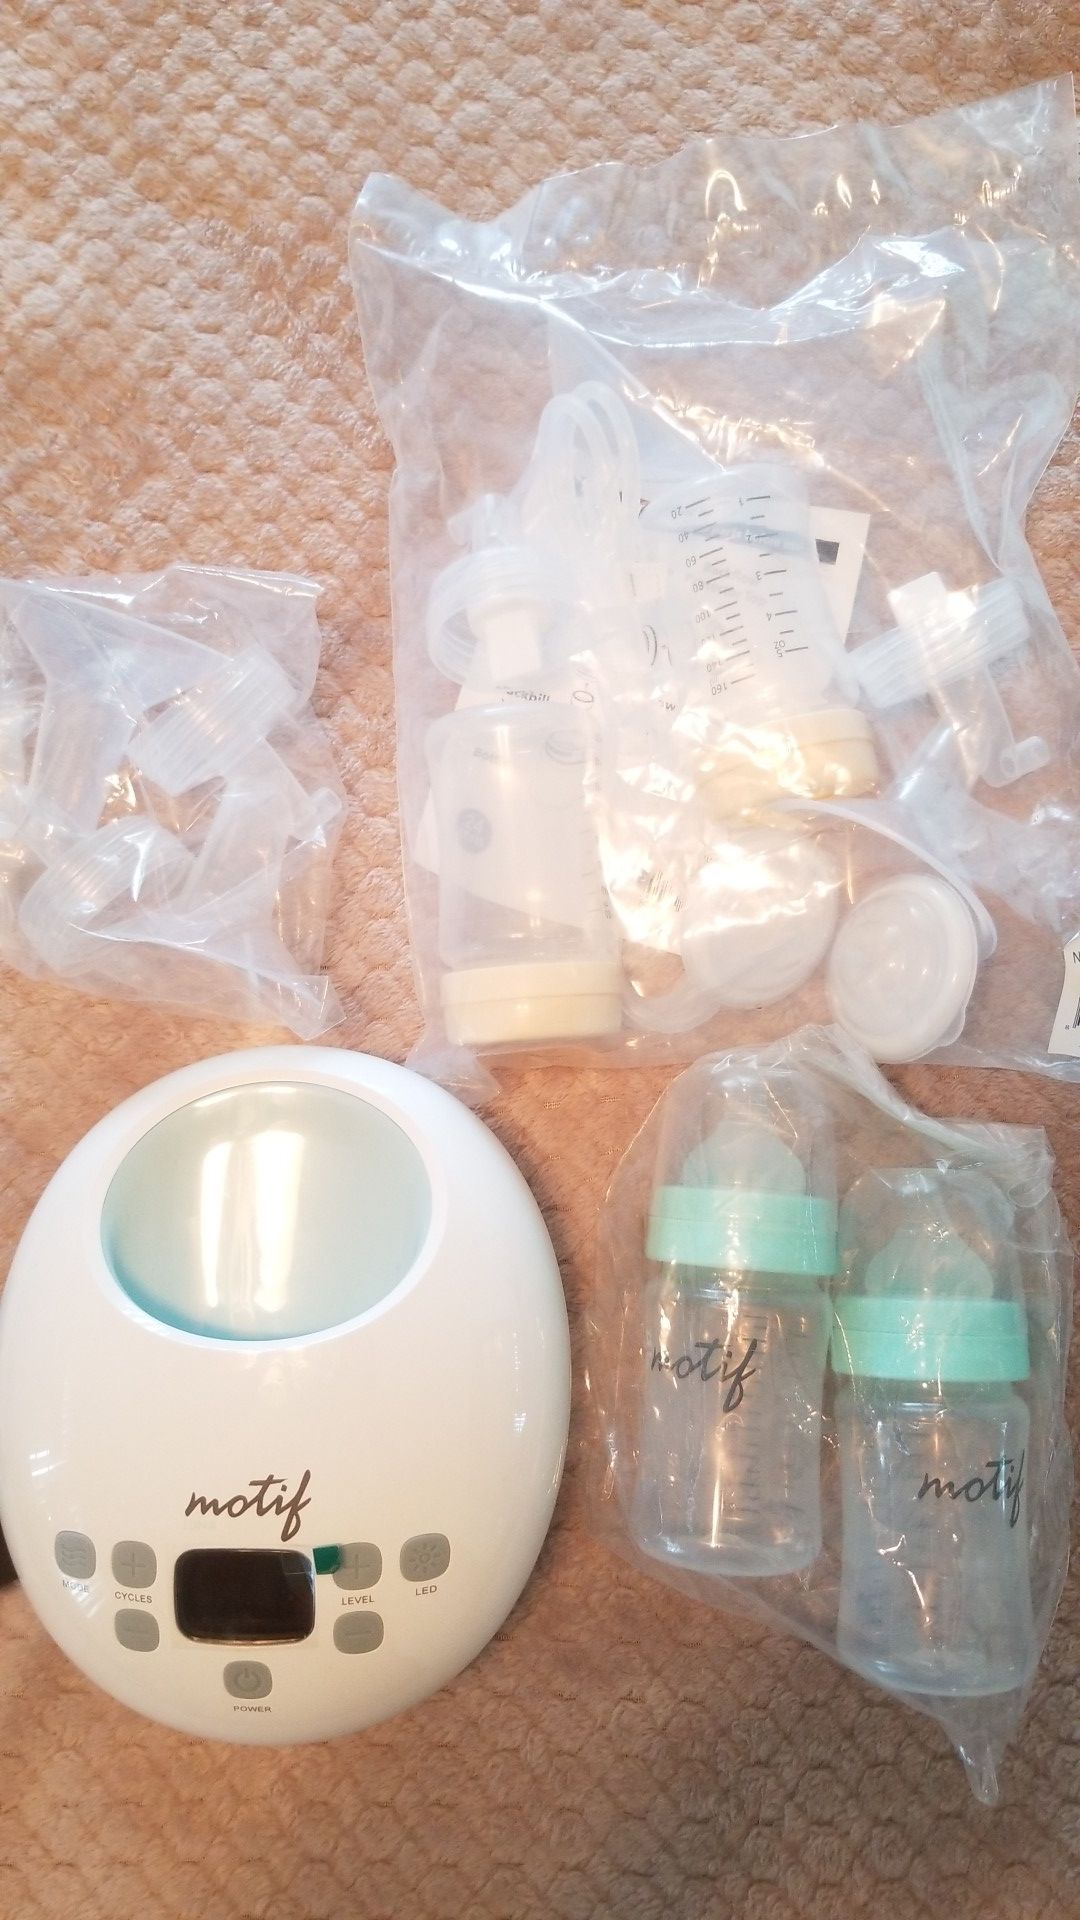 Motif Luna Double Electric Breast Pump. Will accept lower offer